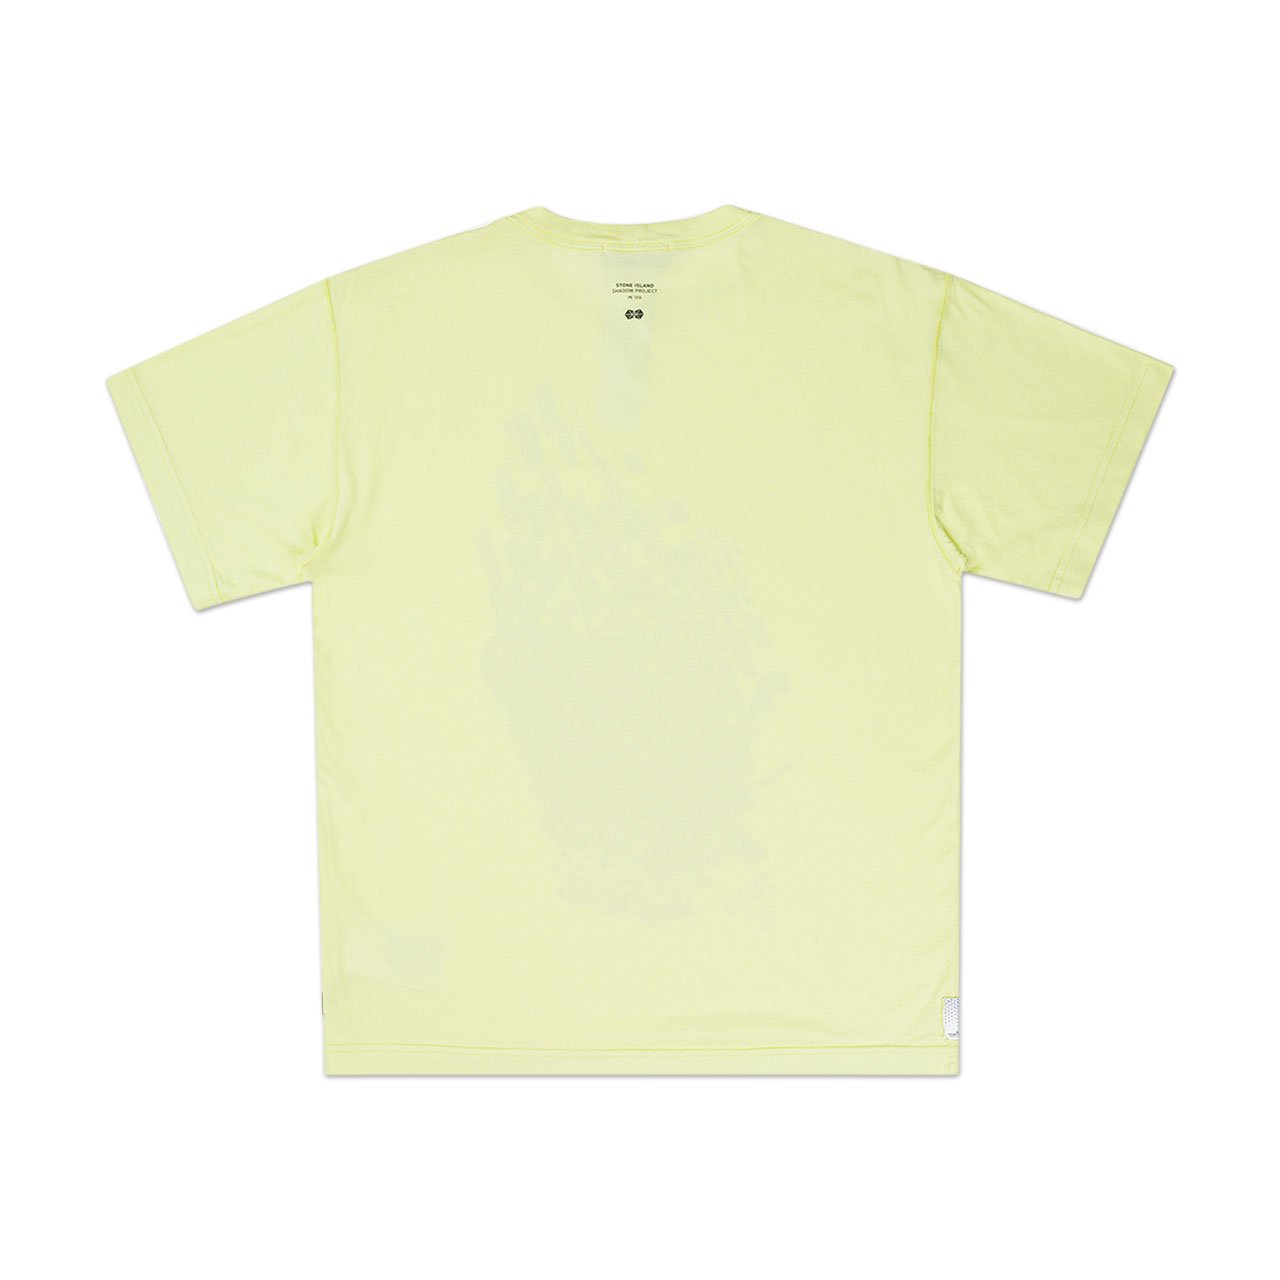 stone island shadow project t-shirt (yellow) - 701920510.v0051 - a.plus - Image - 2